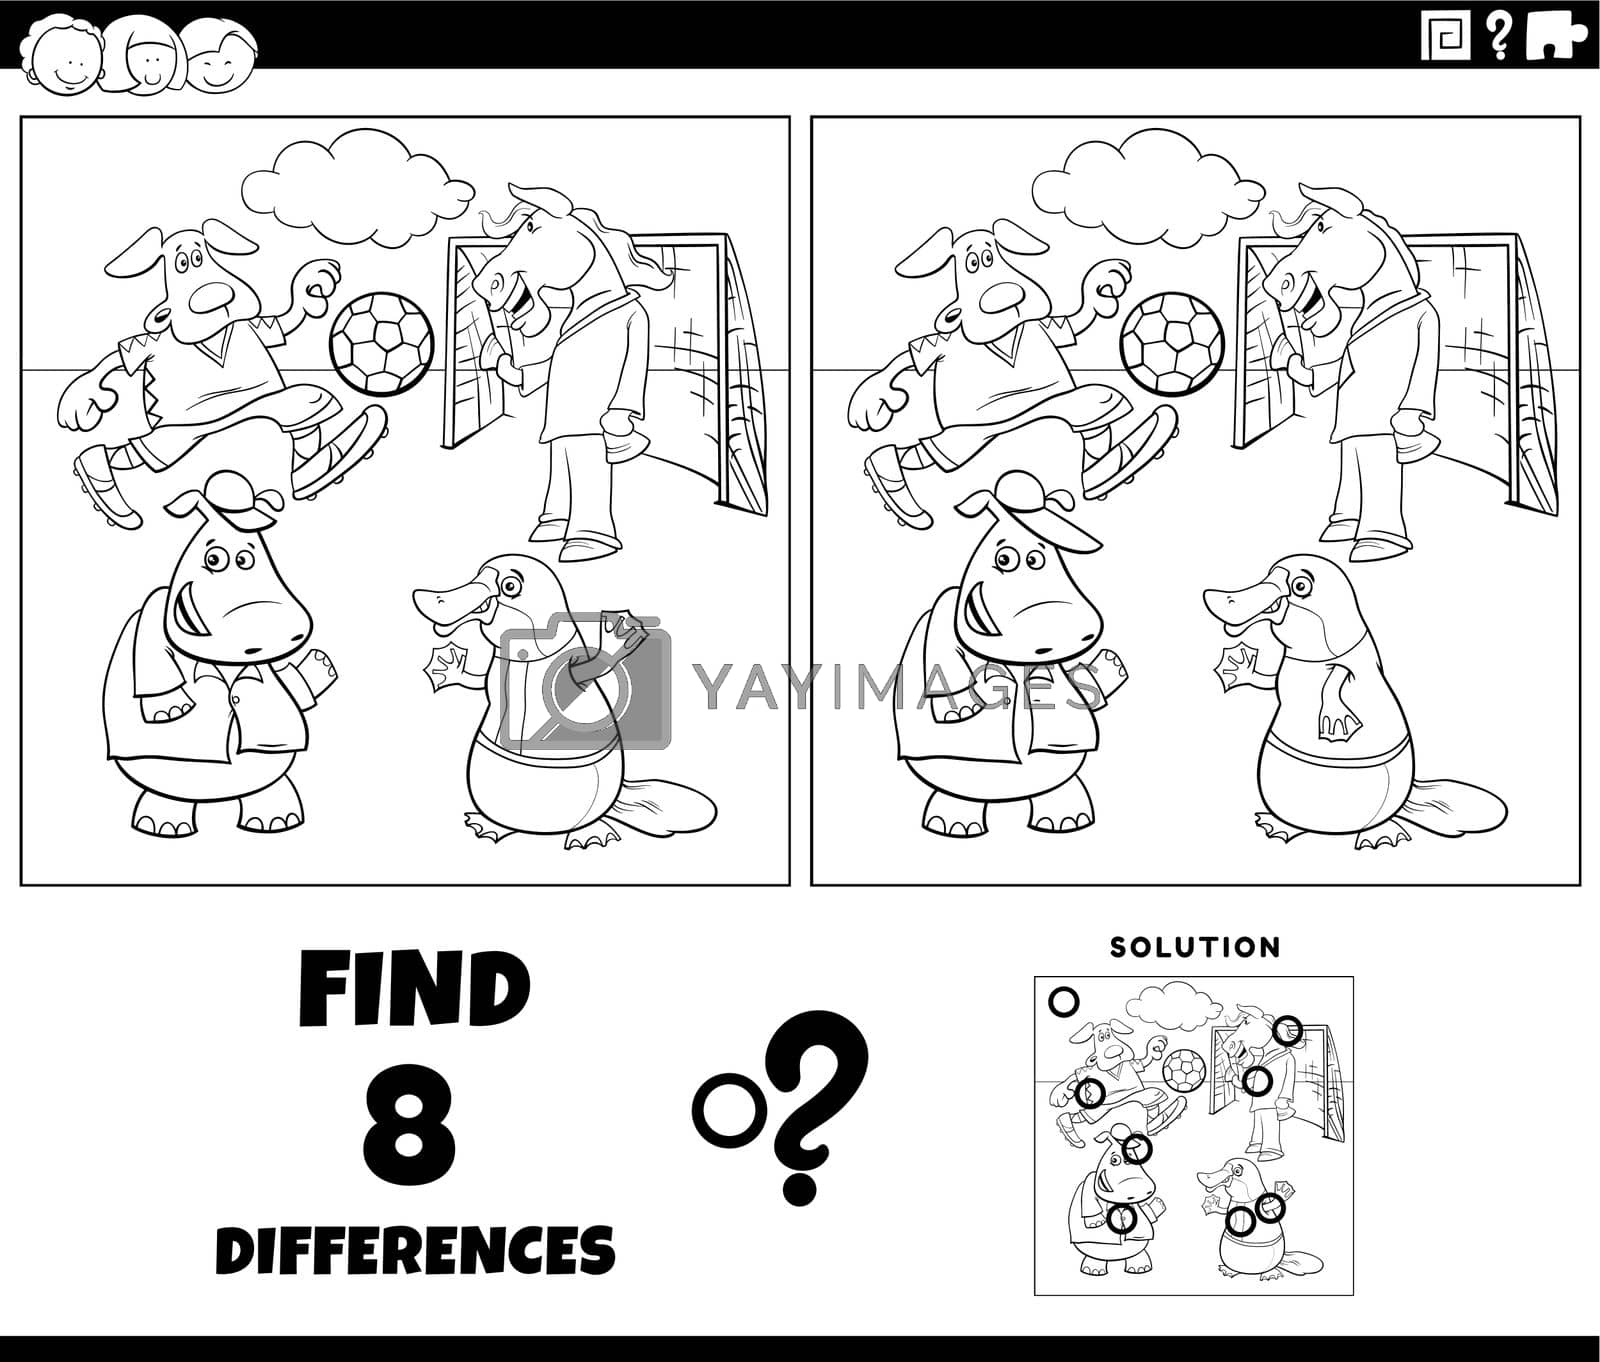 Royalty free image of differences task with animals playing soccer coloring page by izakowski